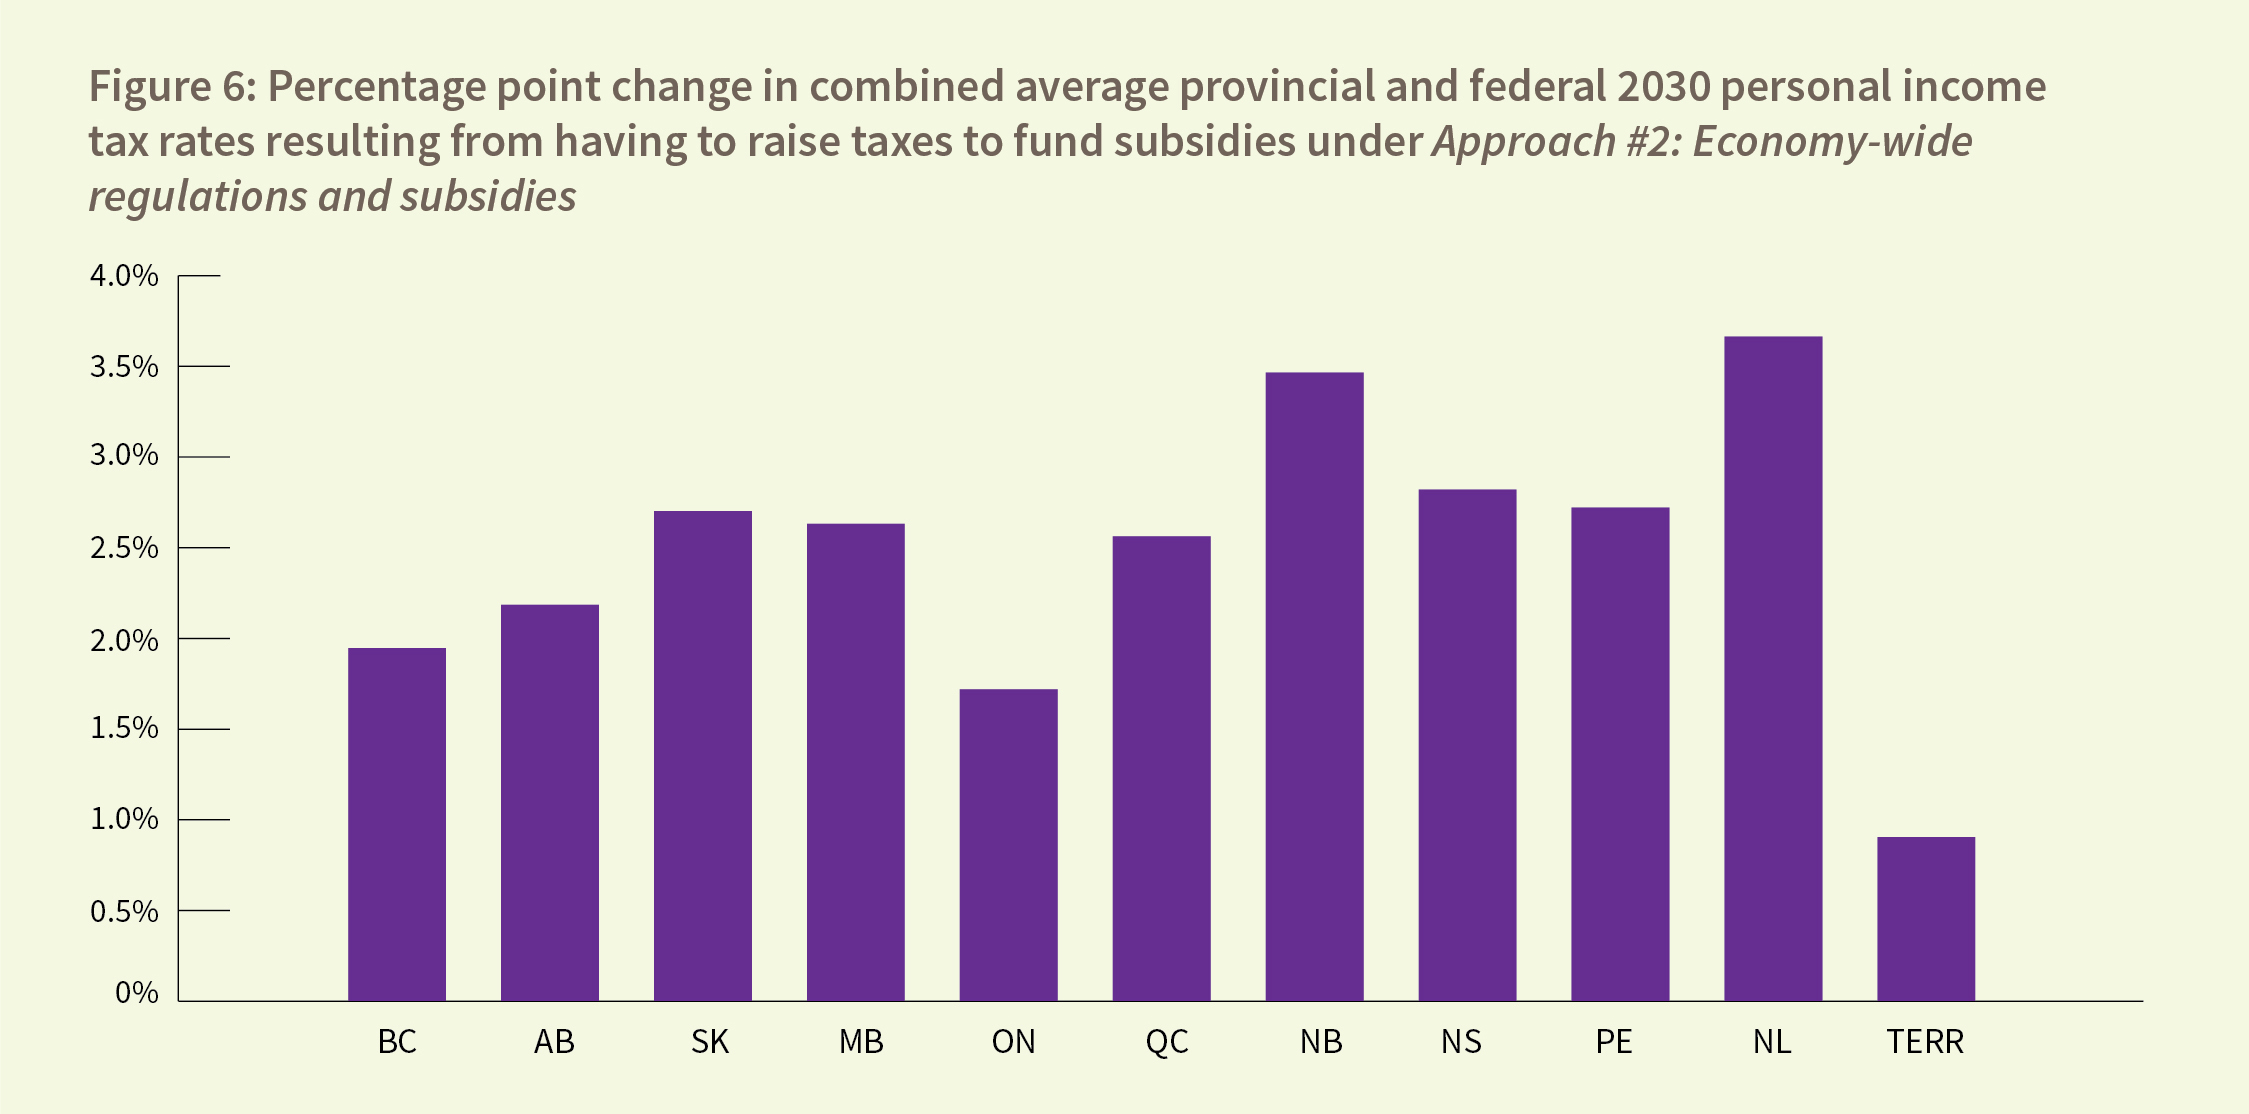 Figure 6: Percentage point change in combined average provincial and federal 2030 personal income tax rates resulting from having to raise taxes to fund subsidies under Approach #2: Economy-wide regulations and subsidies